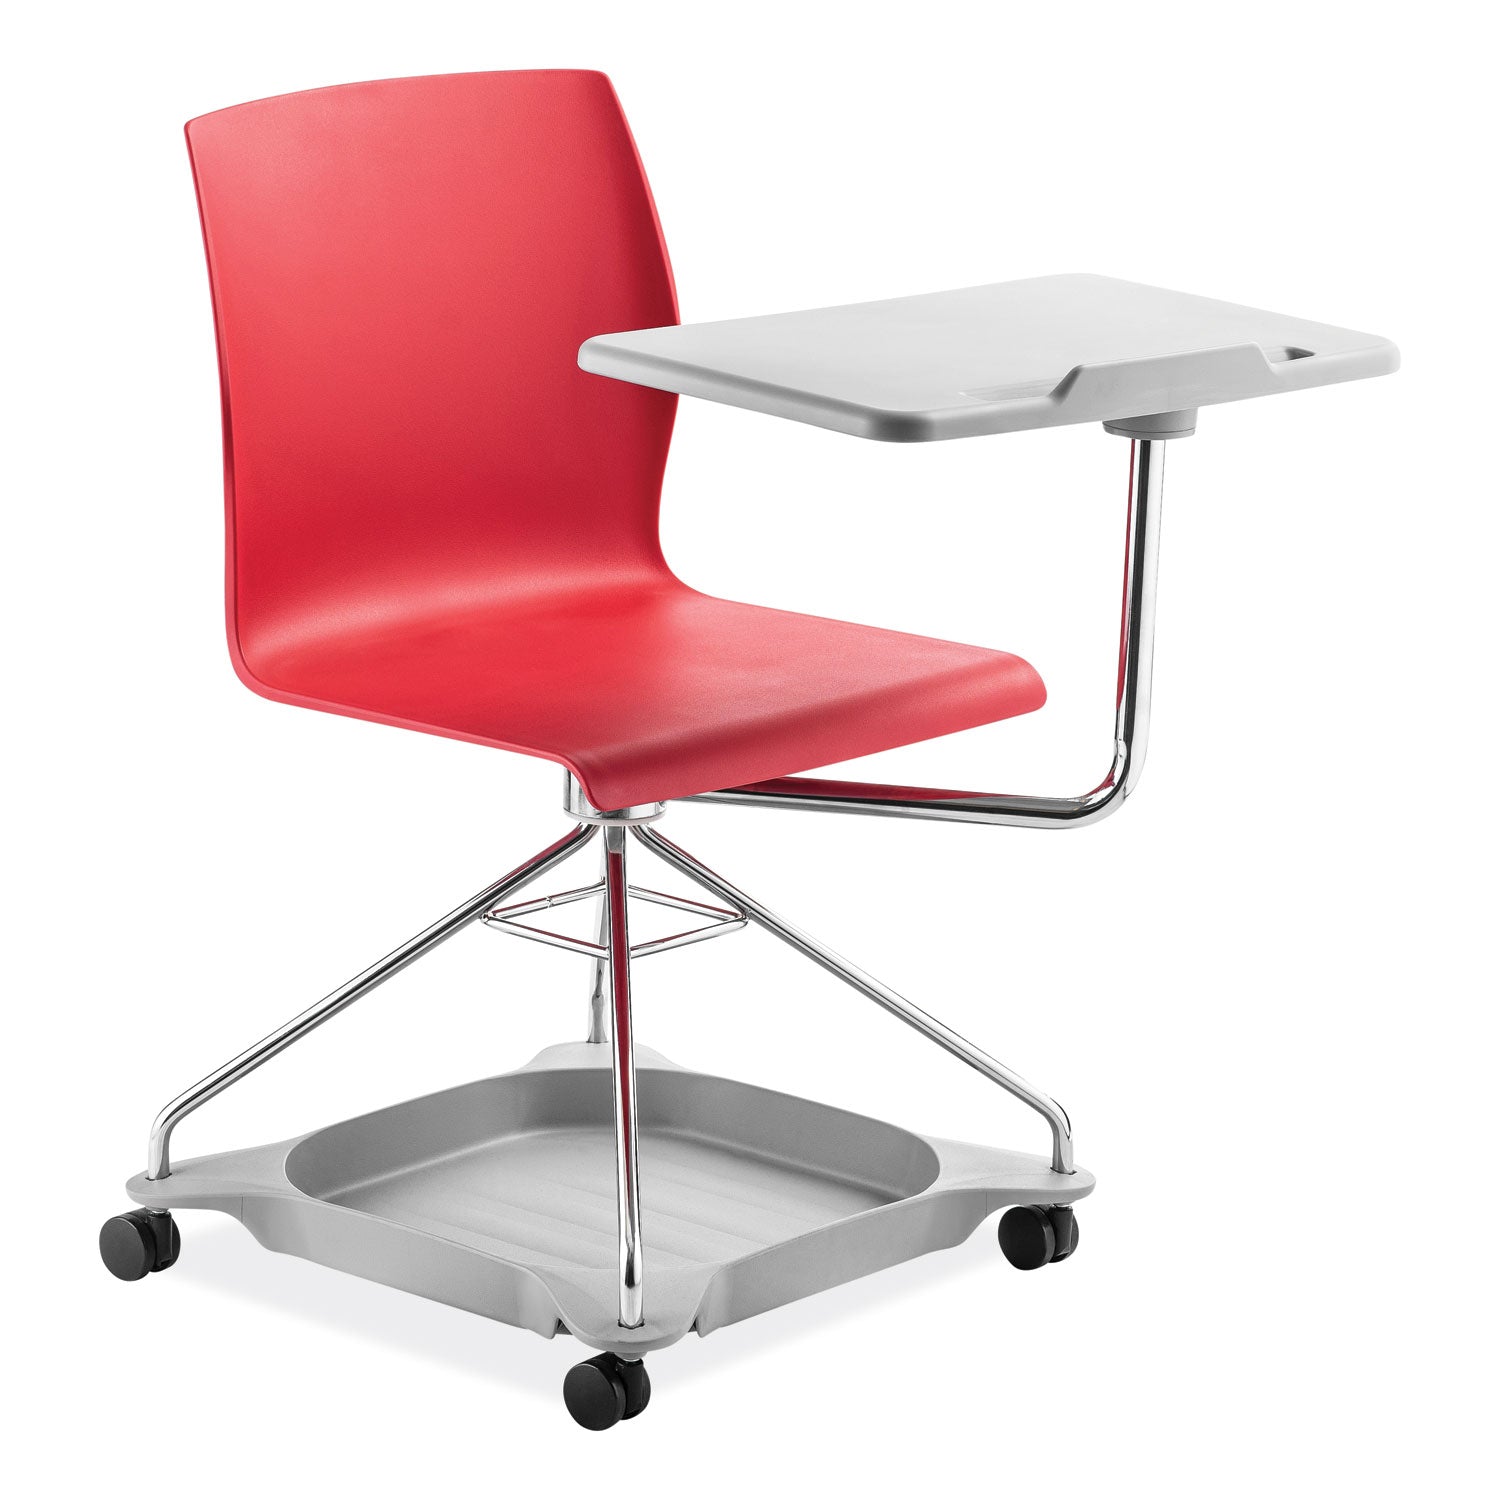 cogo-mobile-tablet-chair-supports-up-to-440-lb-1875-seat-height-red-seat-back-chrome-frame-ships-in-1-3-business-days_npscogo40 - 2